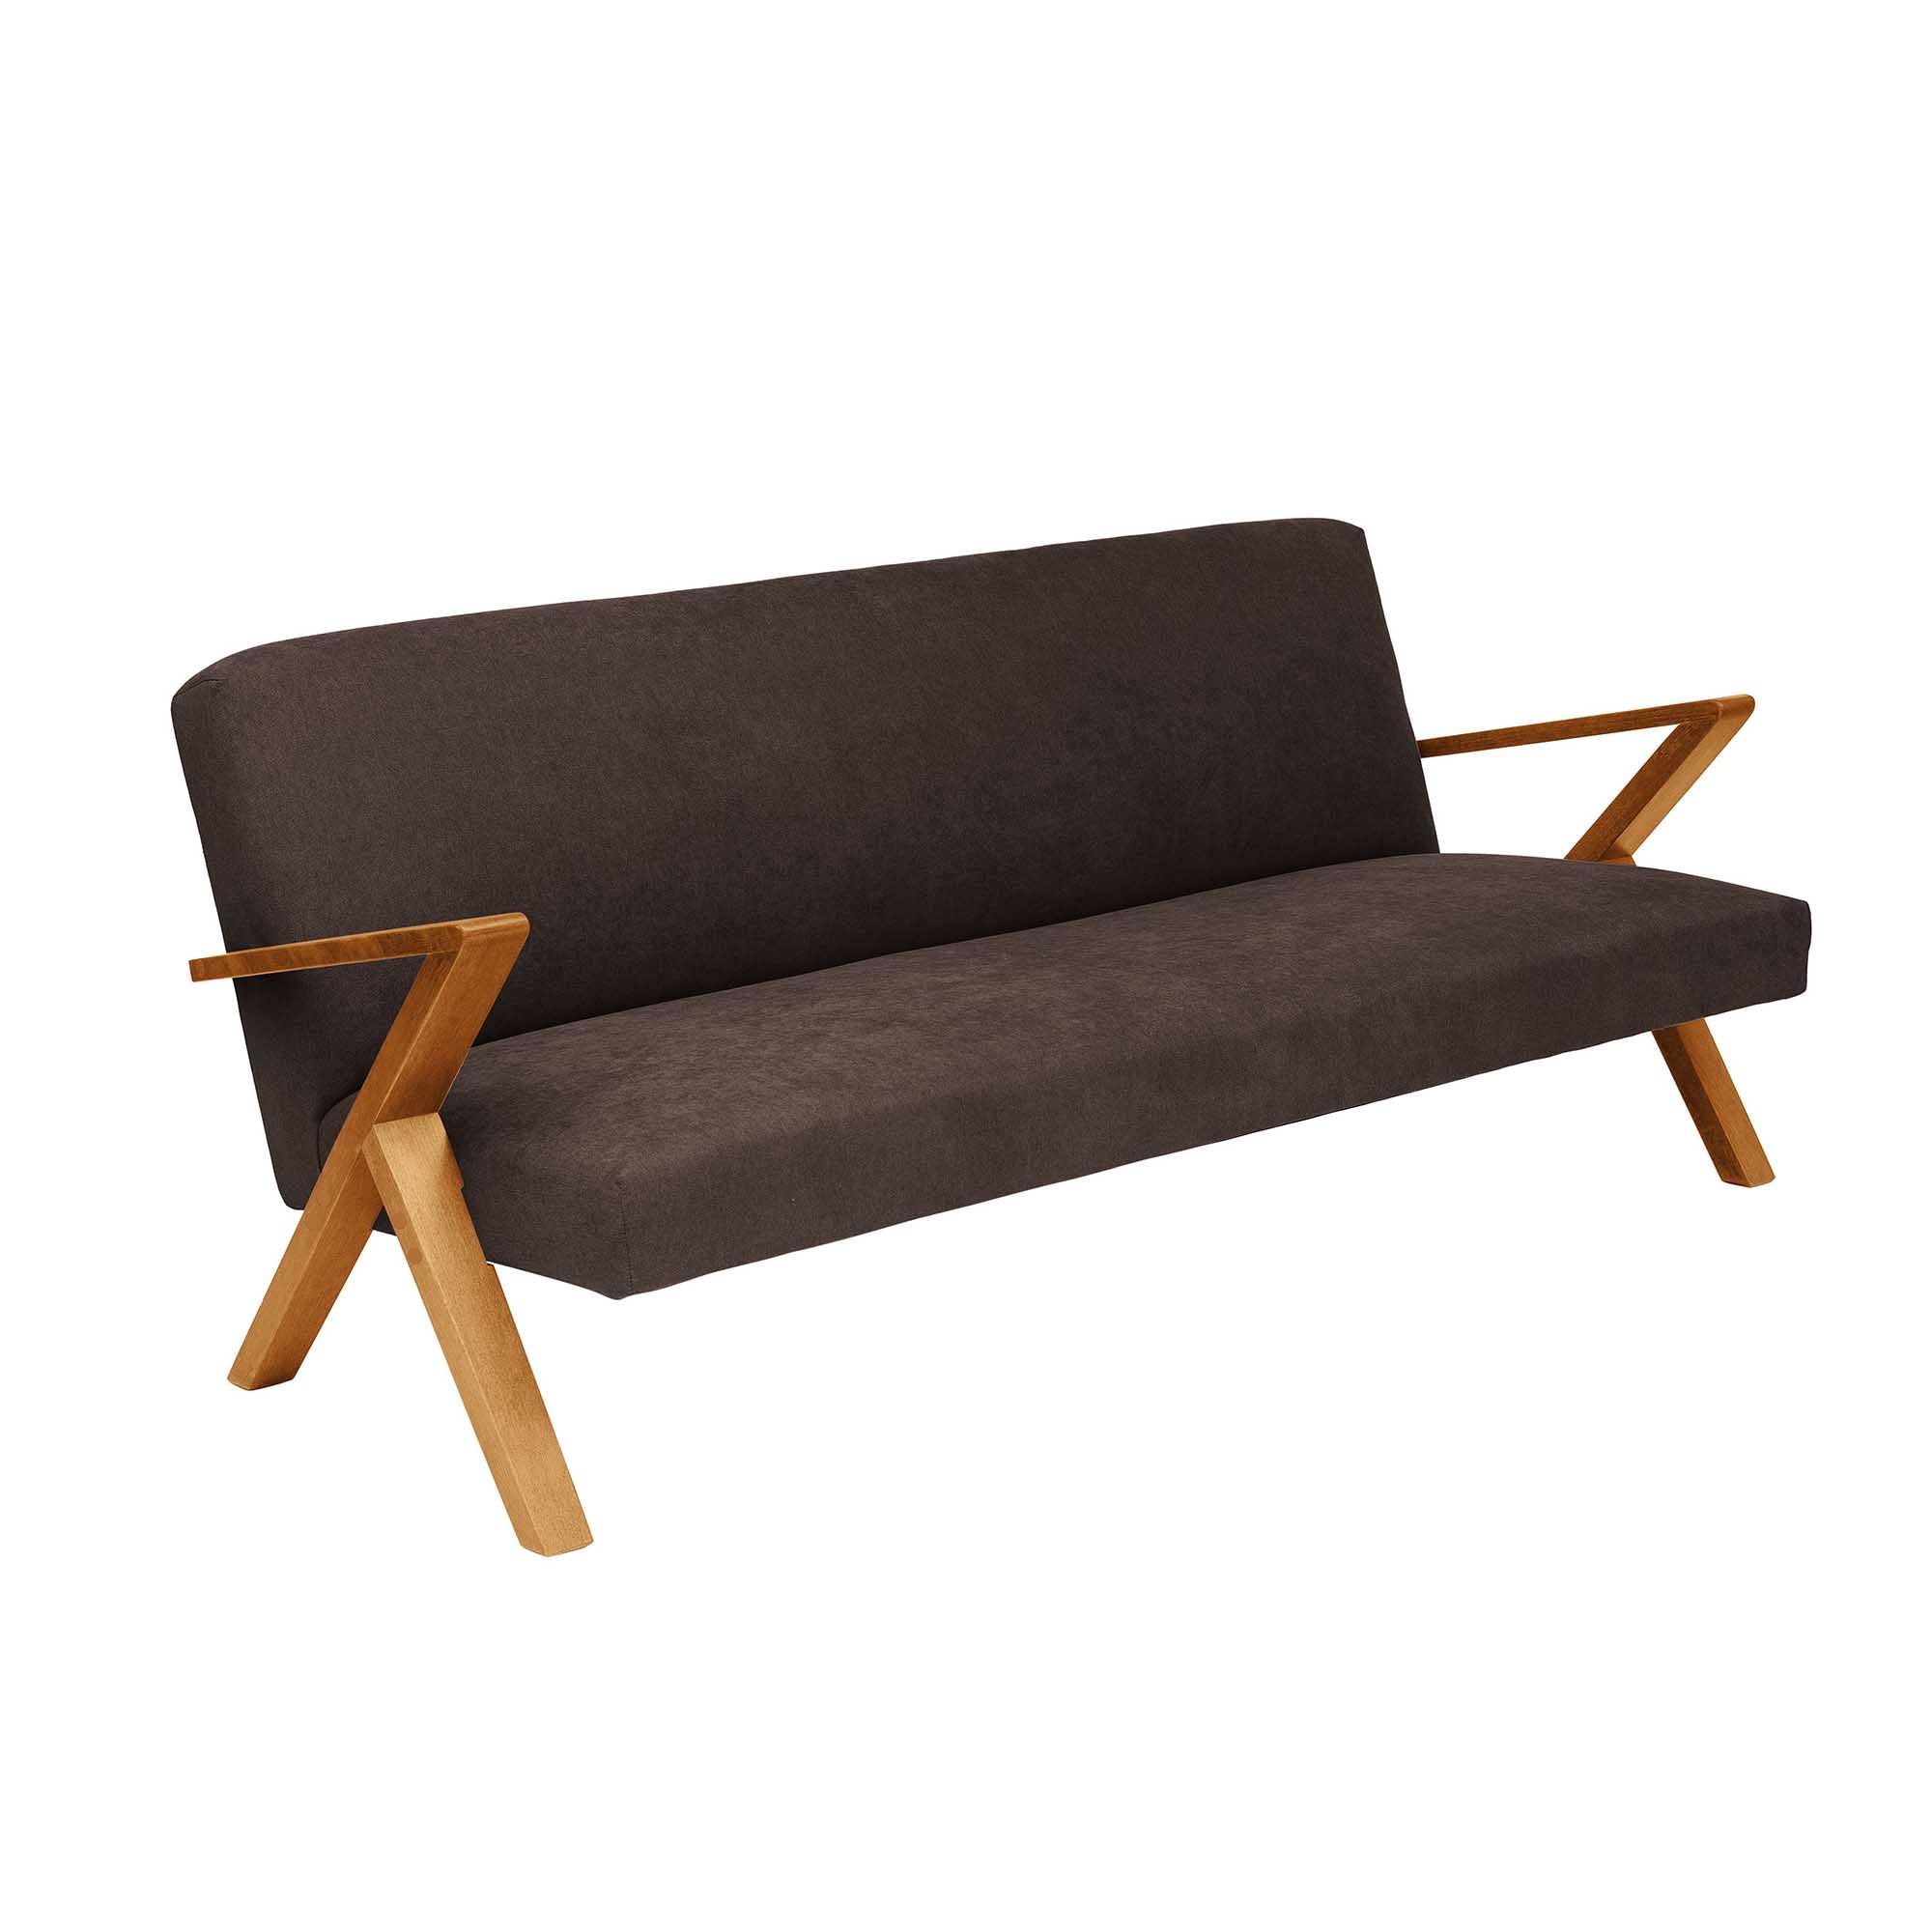 4-seater Sofa Beech Wood Frame, Oak Colour brown fabeic, half-side view